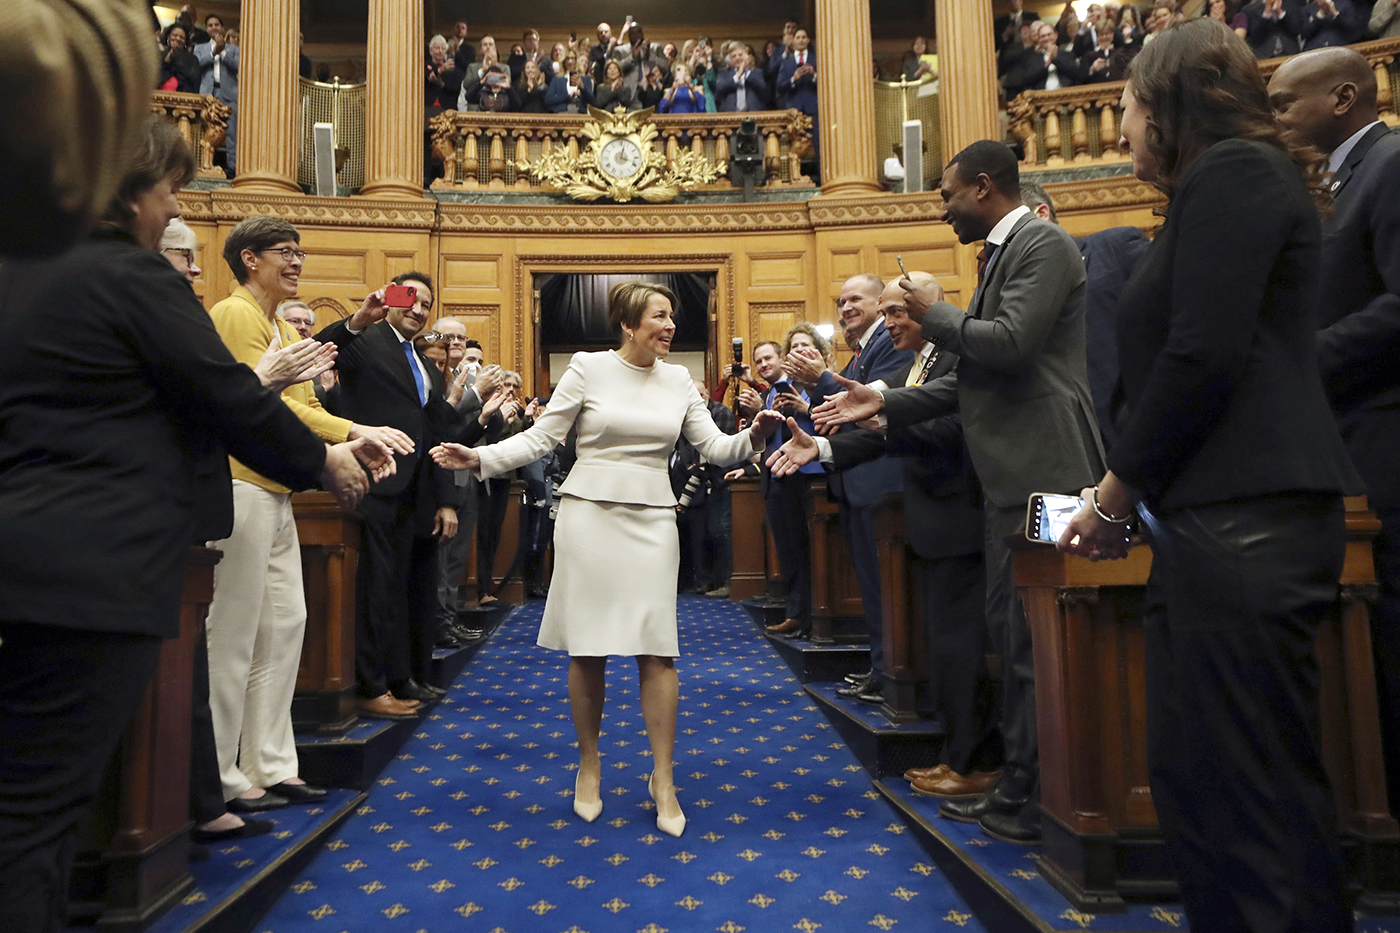 maura healey shaking hands as she walks down the aisle of the house of chambers